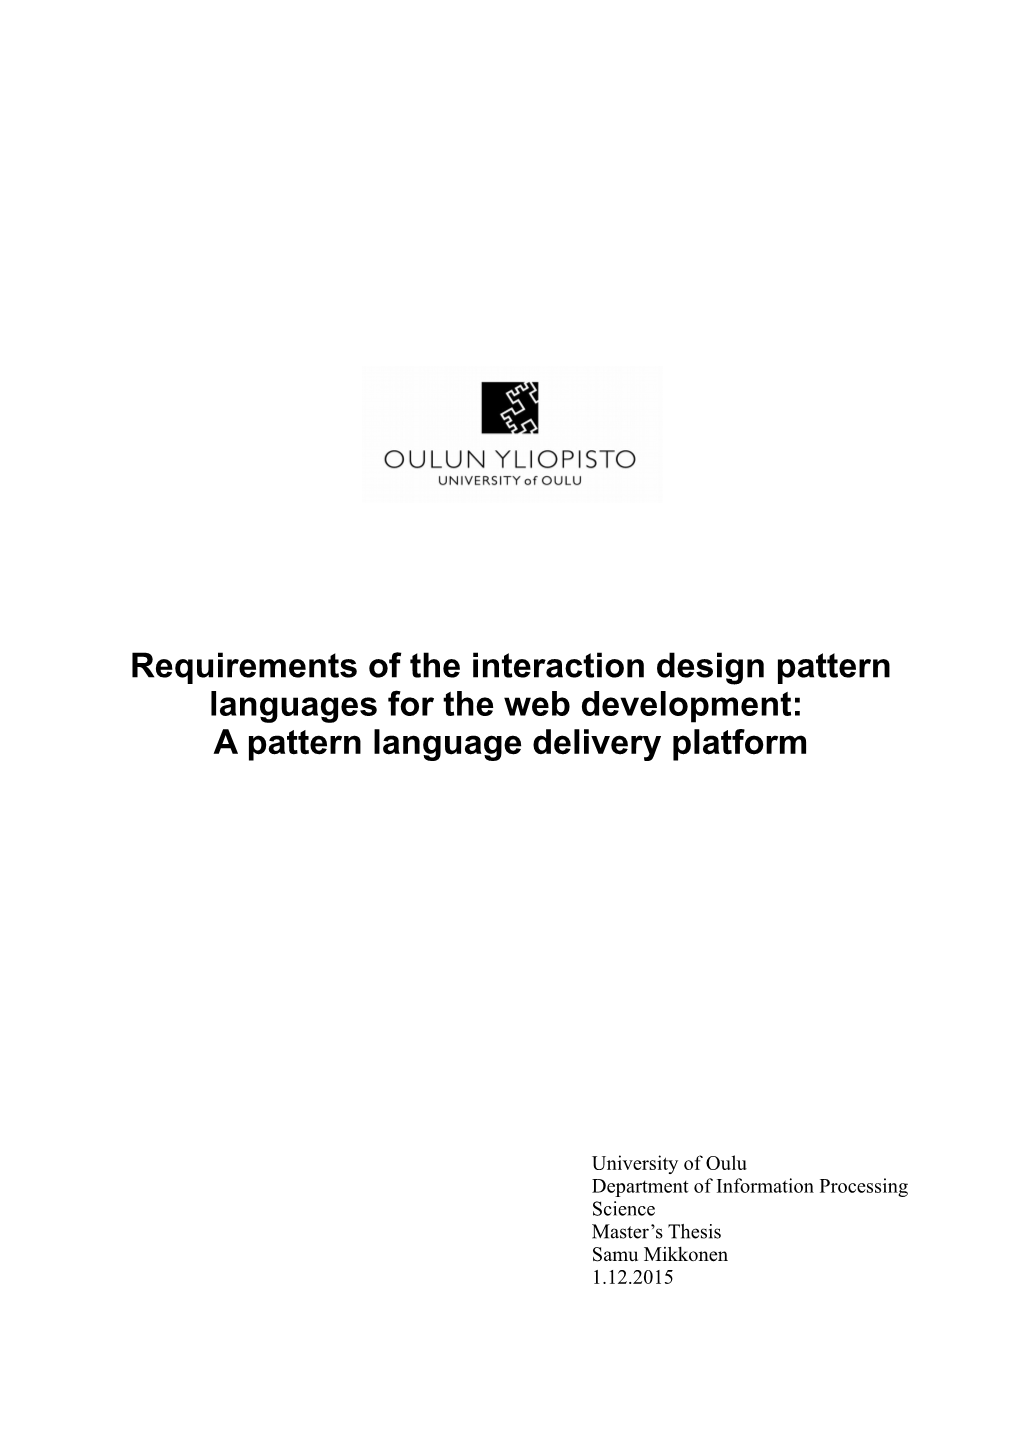 Requirements of the Interaction Design Pattern Languages for the Web Development: a Pattern Language Delivery Platform